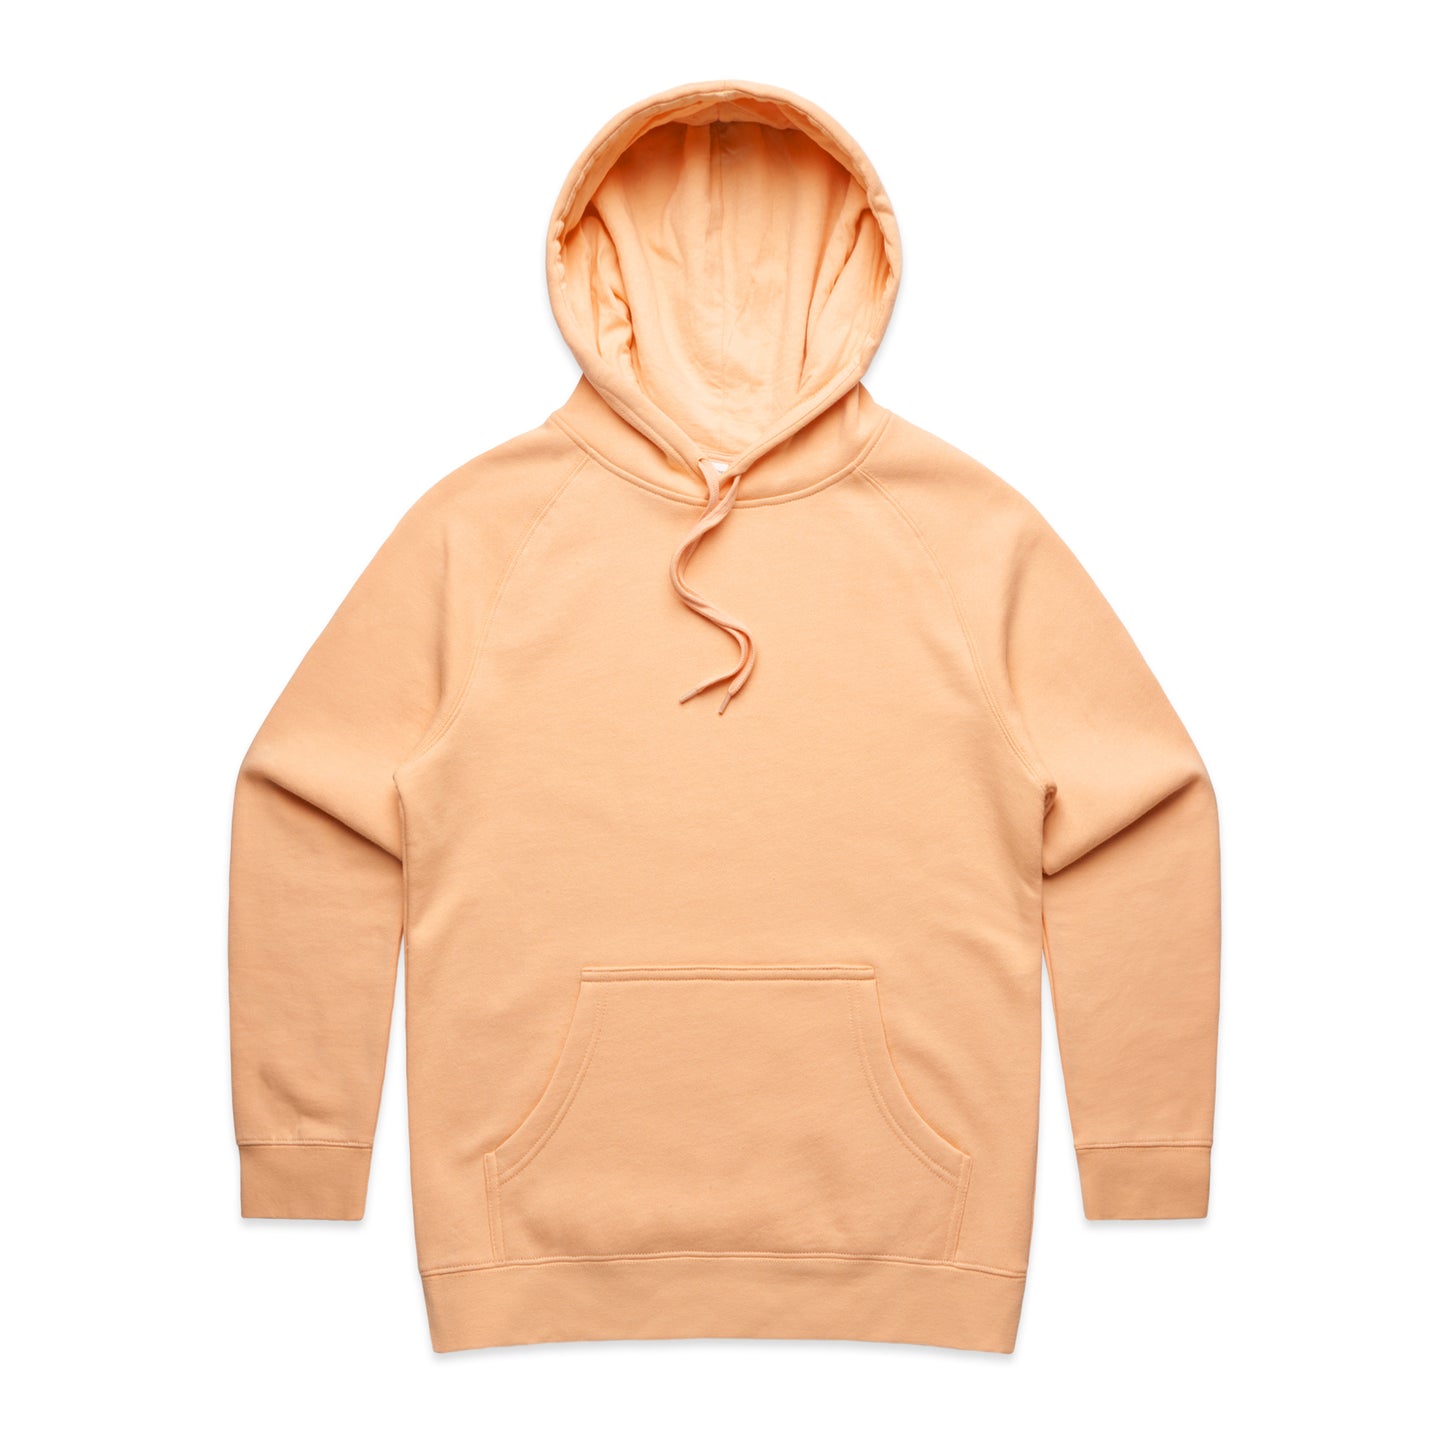 AS Colour Women's Supply Hoodies